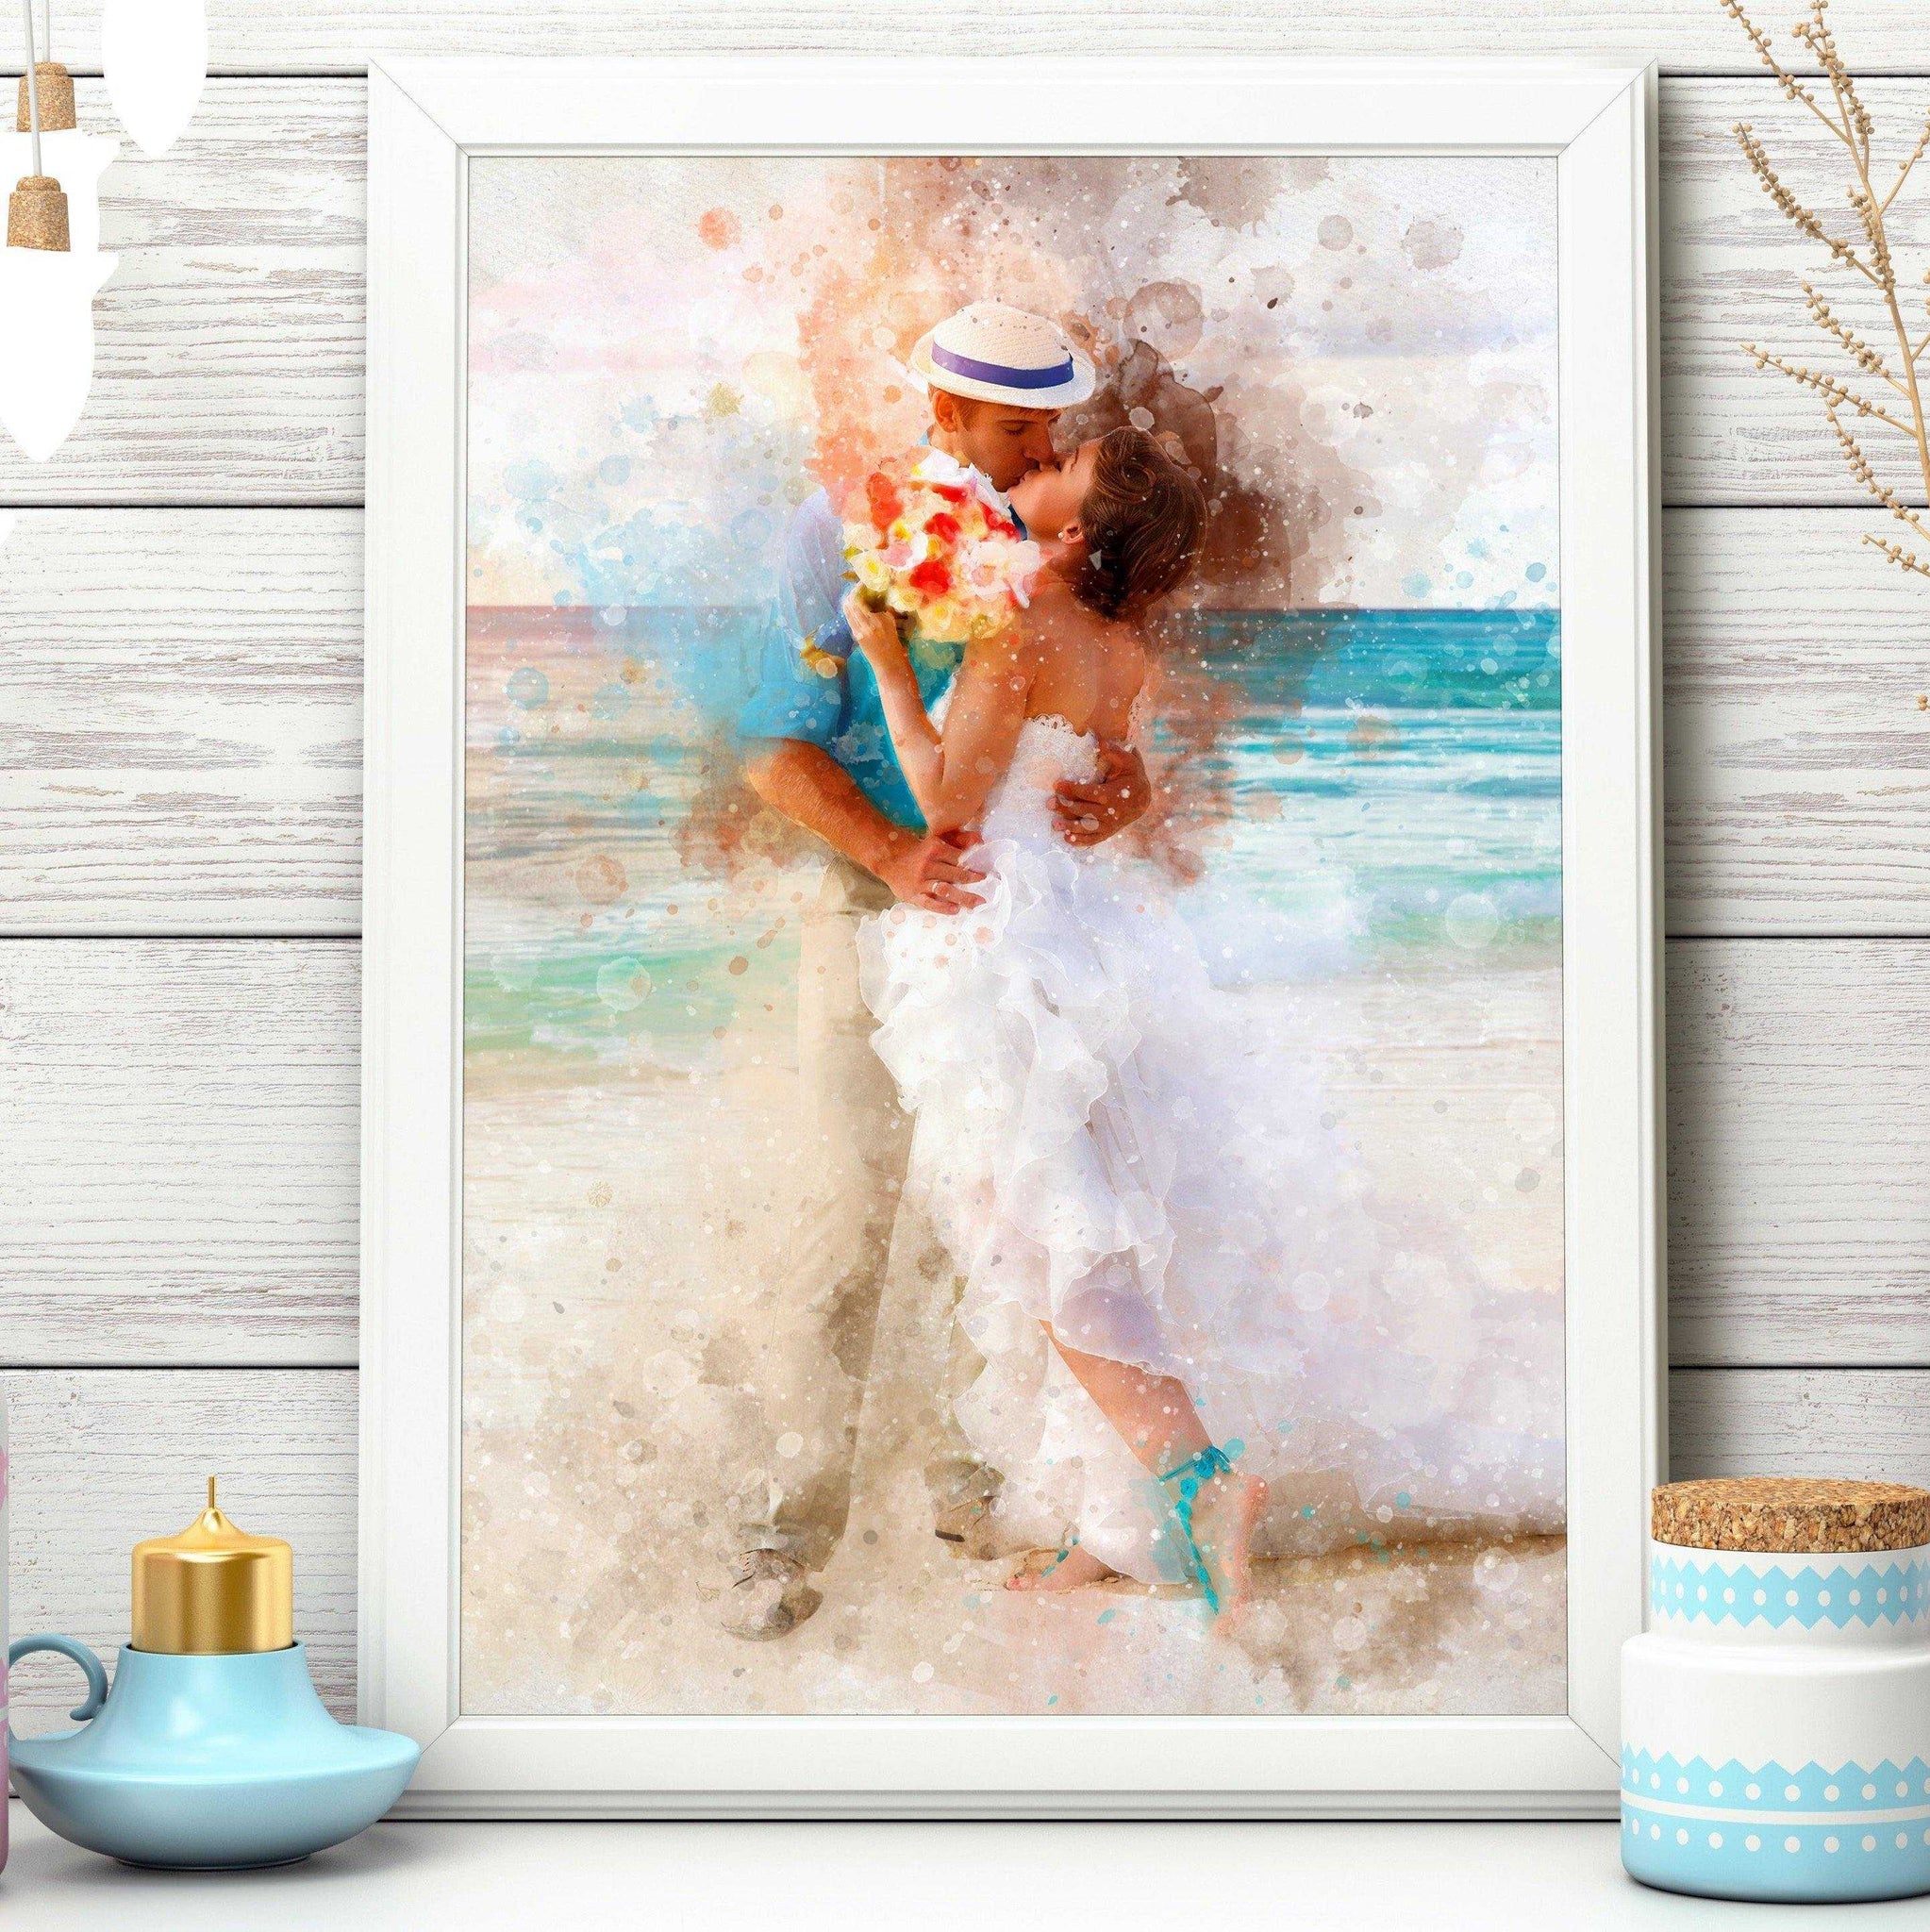 Custom Painted Portraits, Custom Painted Pictures, Personalized Painted Beach Portrait - FromPicToArt